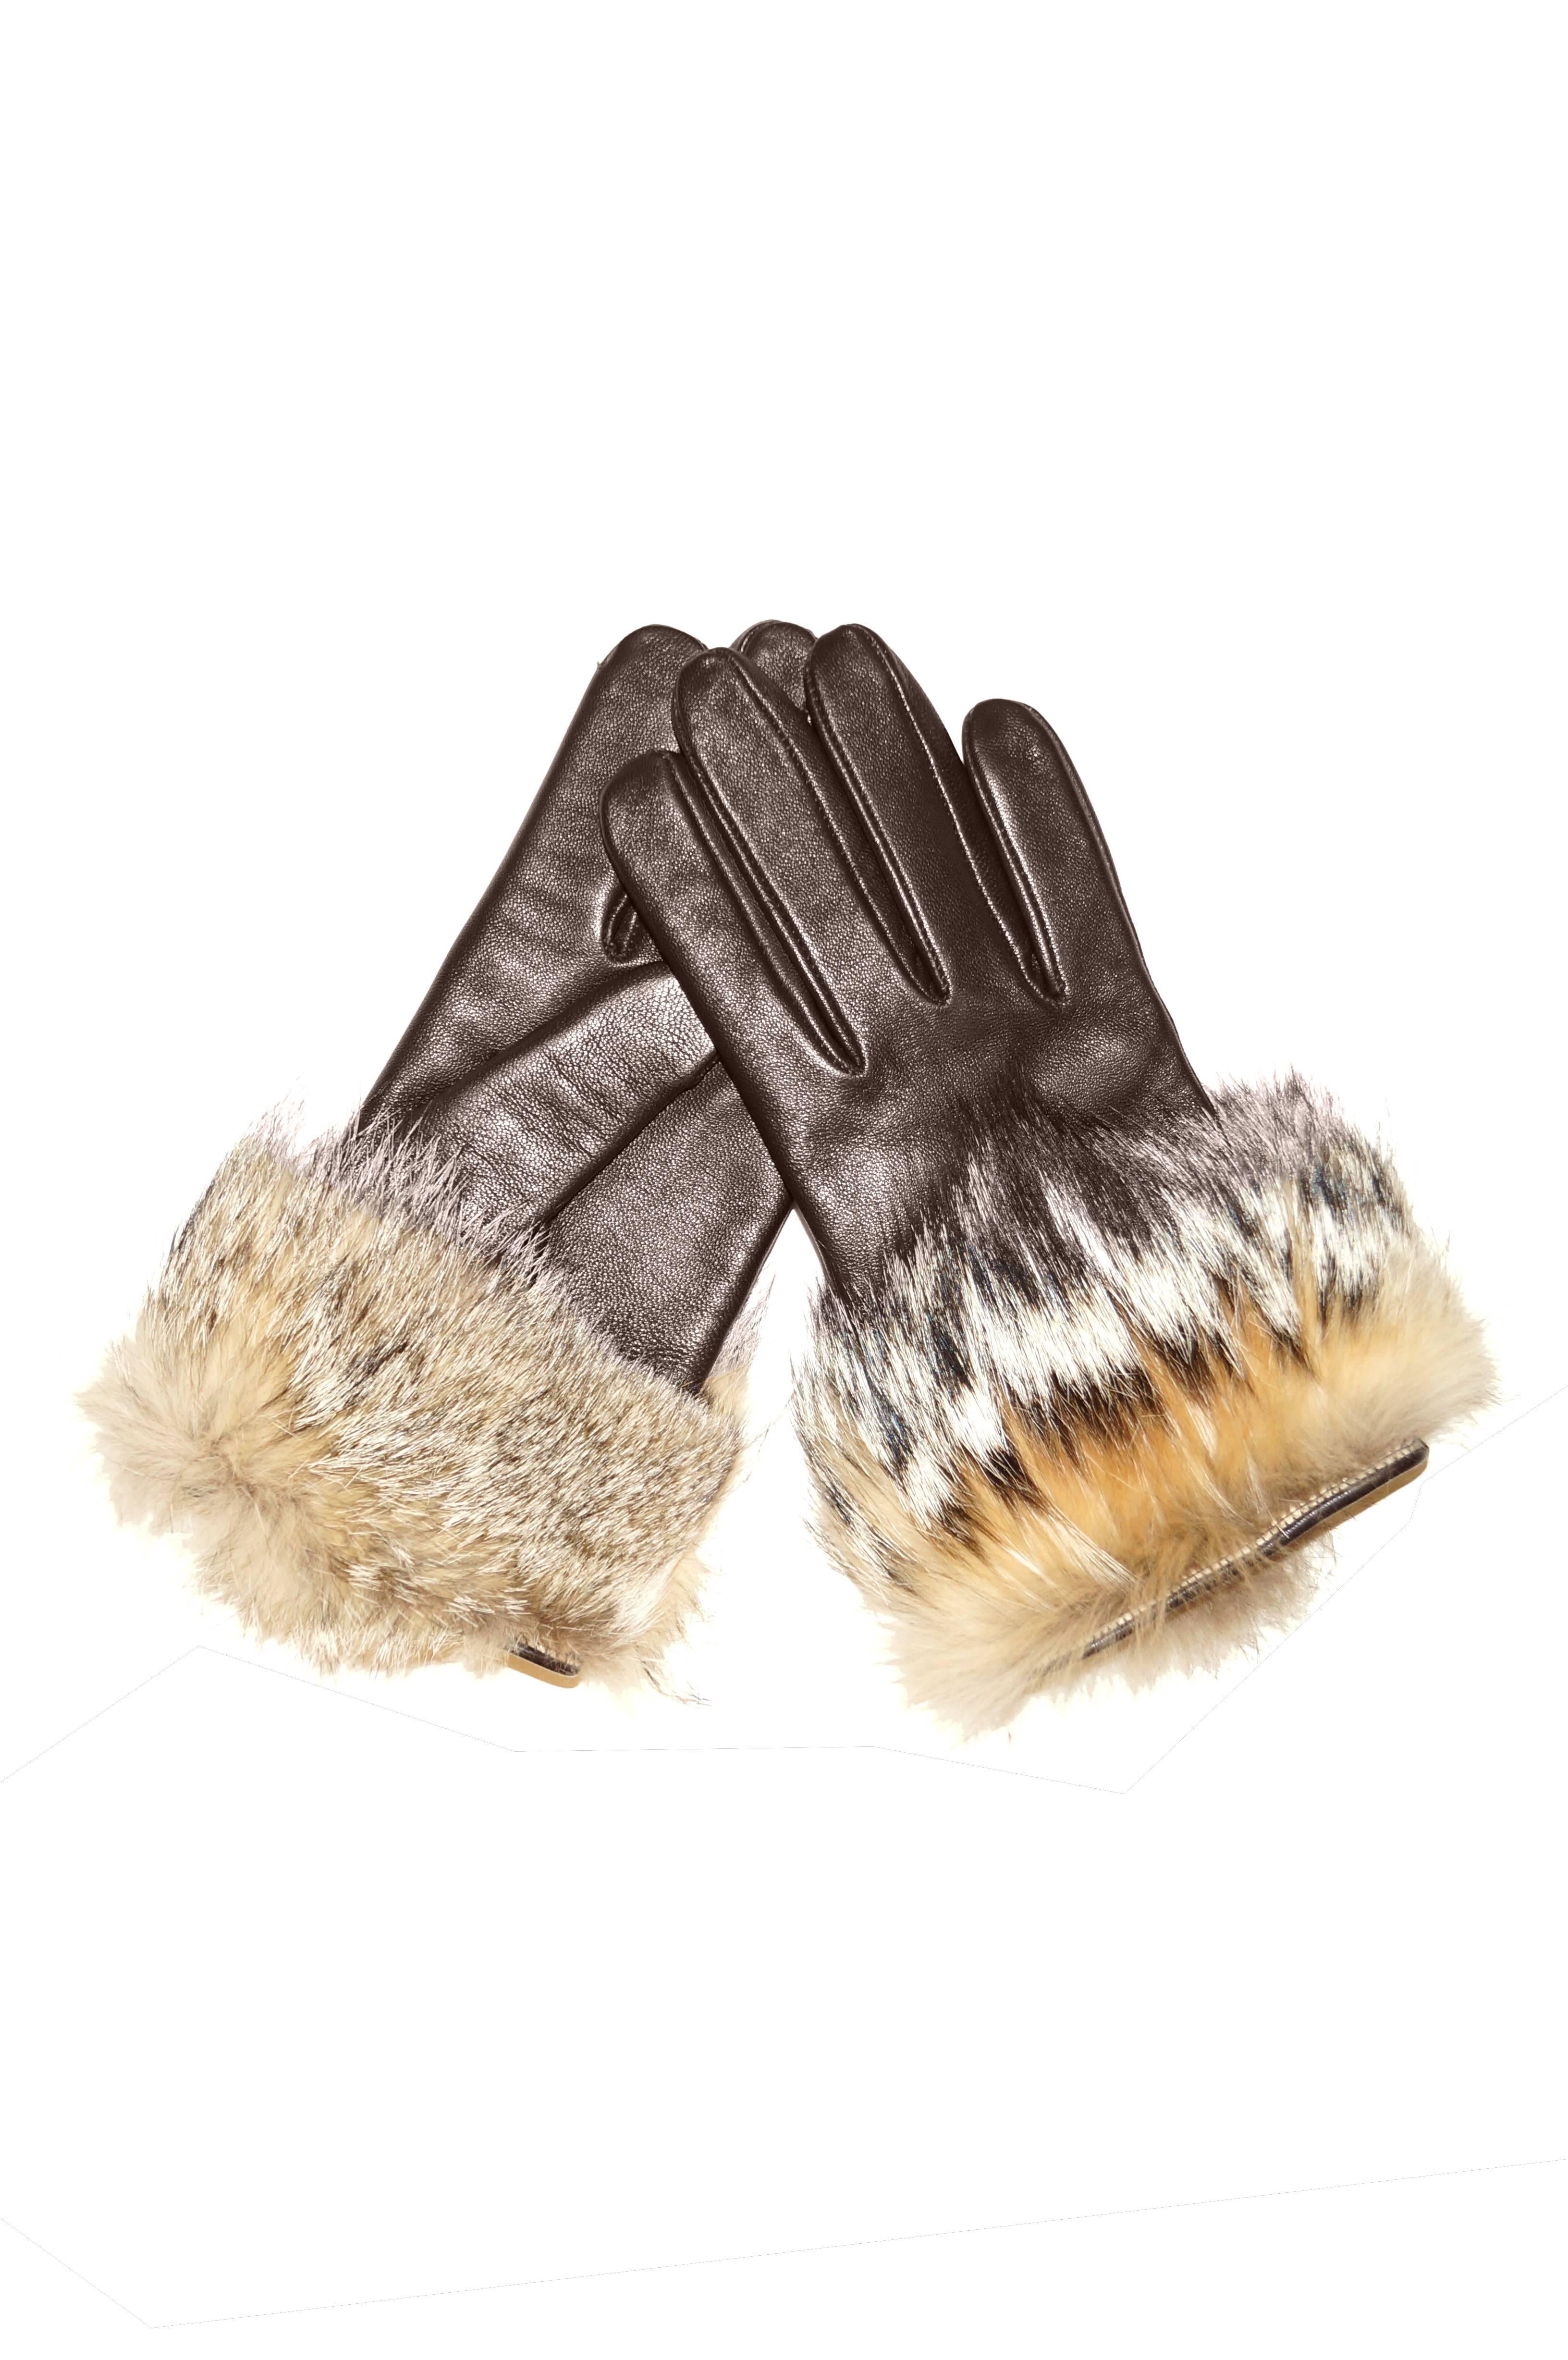 So soft, so supple, so warm! Glorious pair of russet brown gloves with almond rounded finger tips. The gloves come up to just above the wrist and feature a thick band of “raccoon dog”  fur on the cuff. The fur has a cream-colored base with warm grey